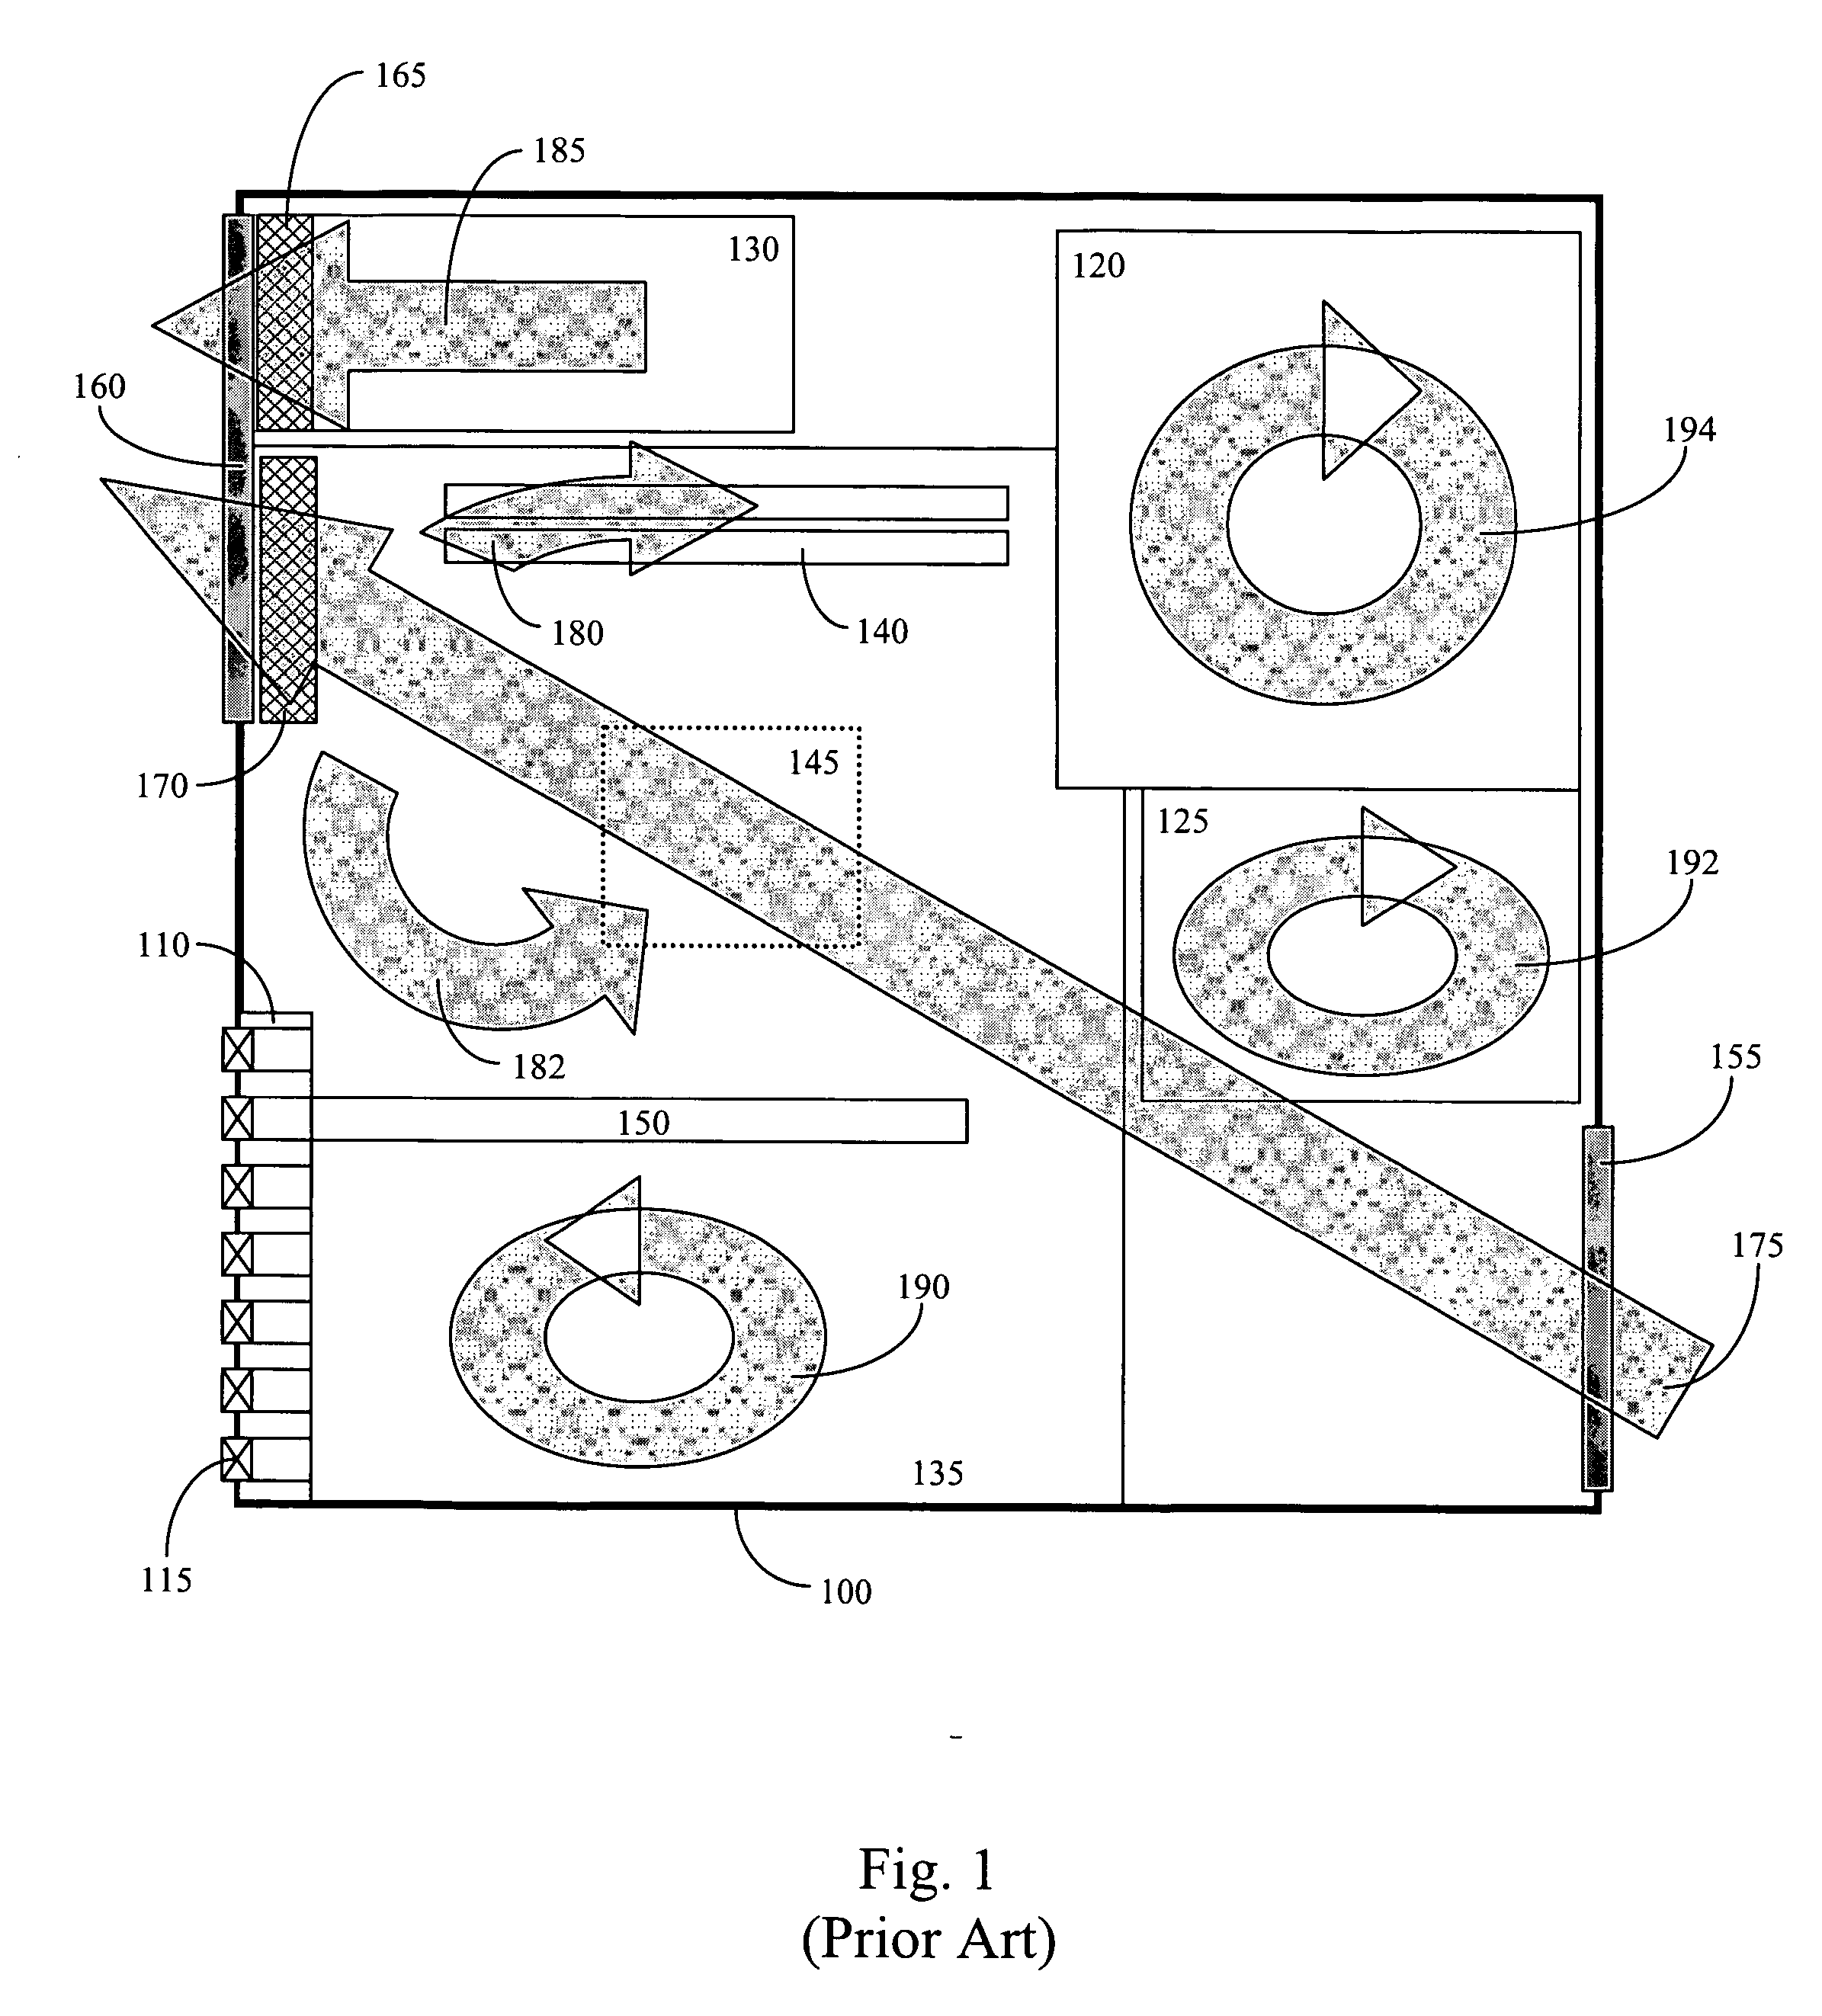 Computer chassis for improved airflow and heat transfer from computer system components